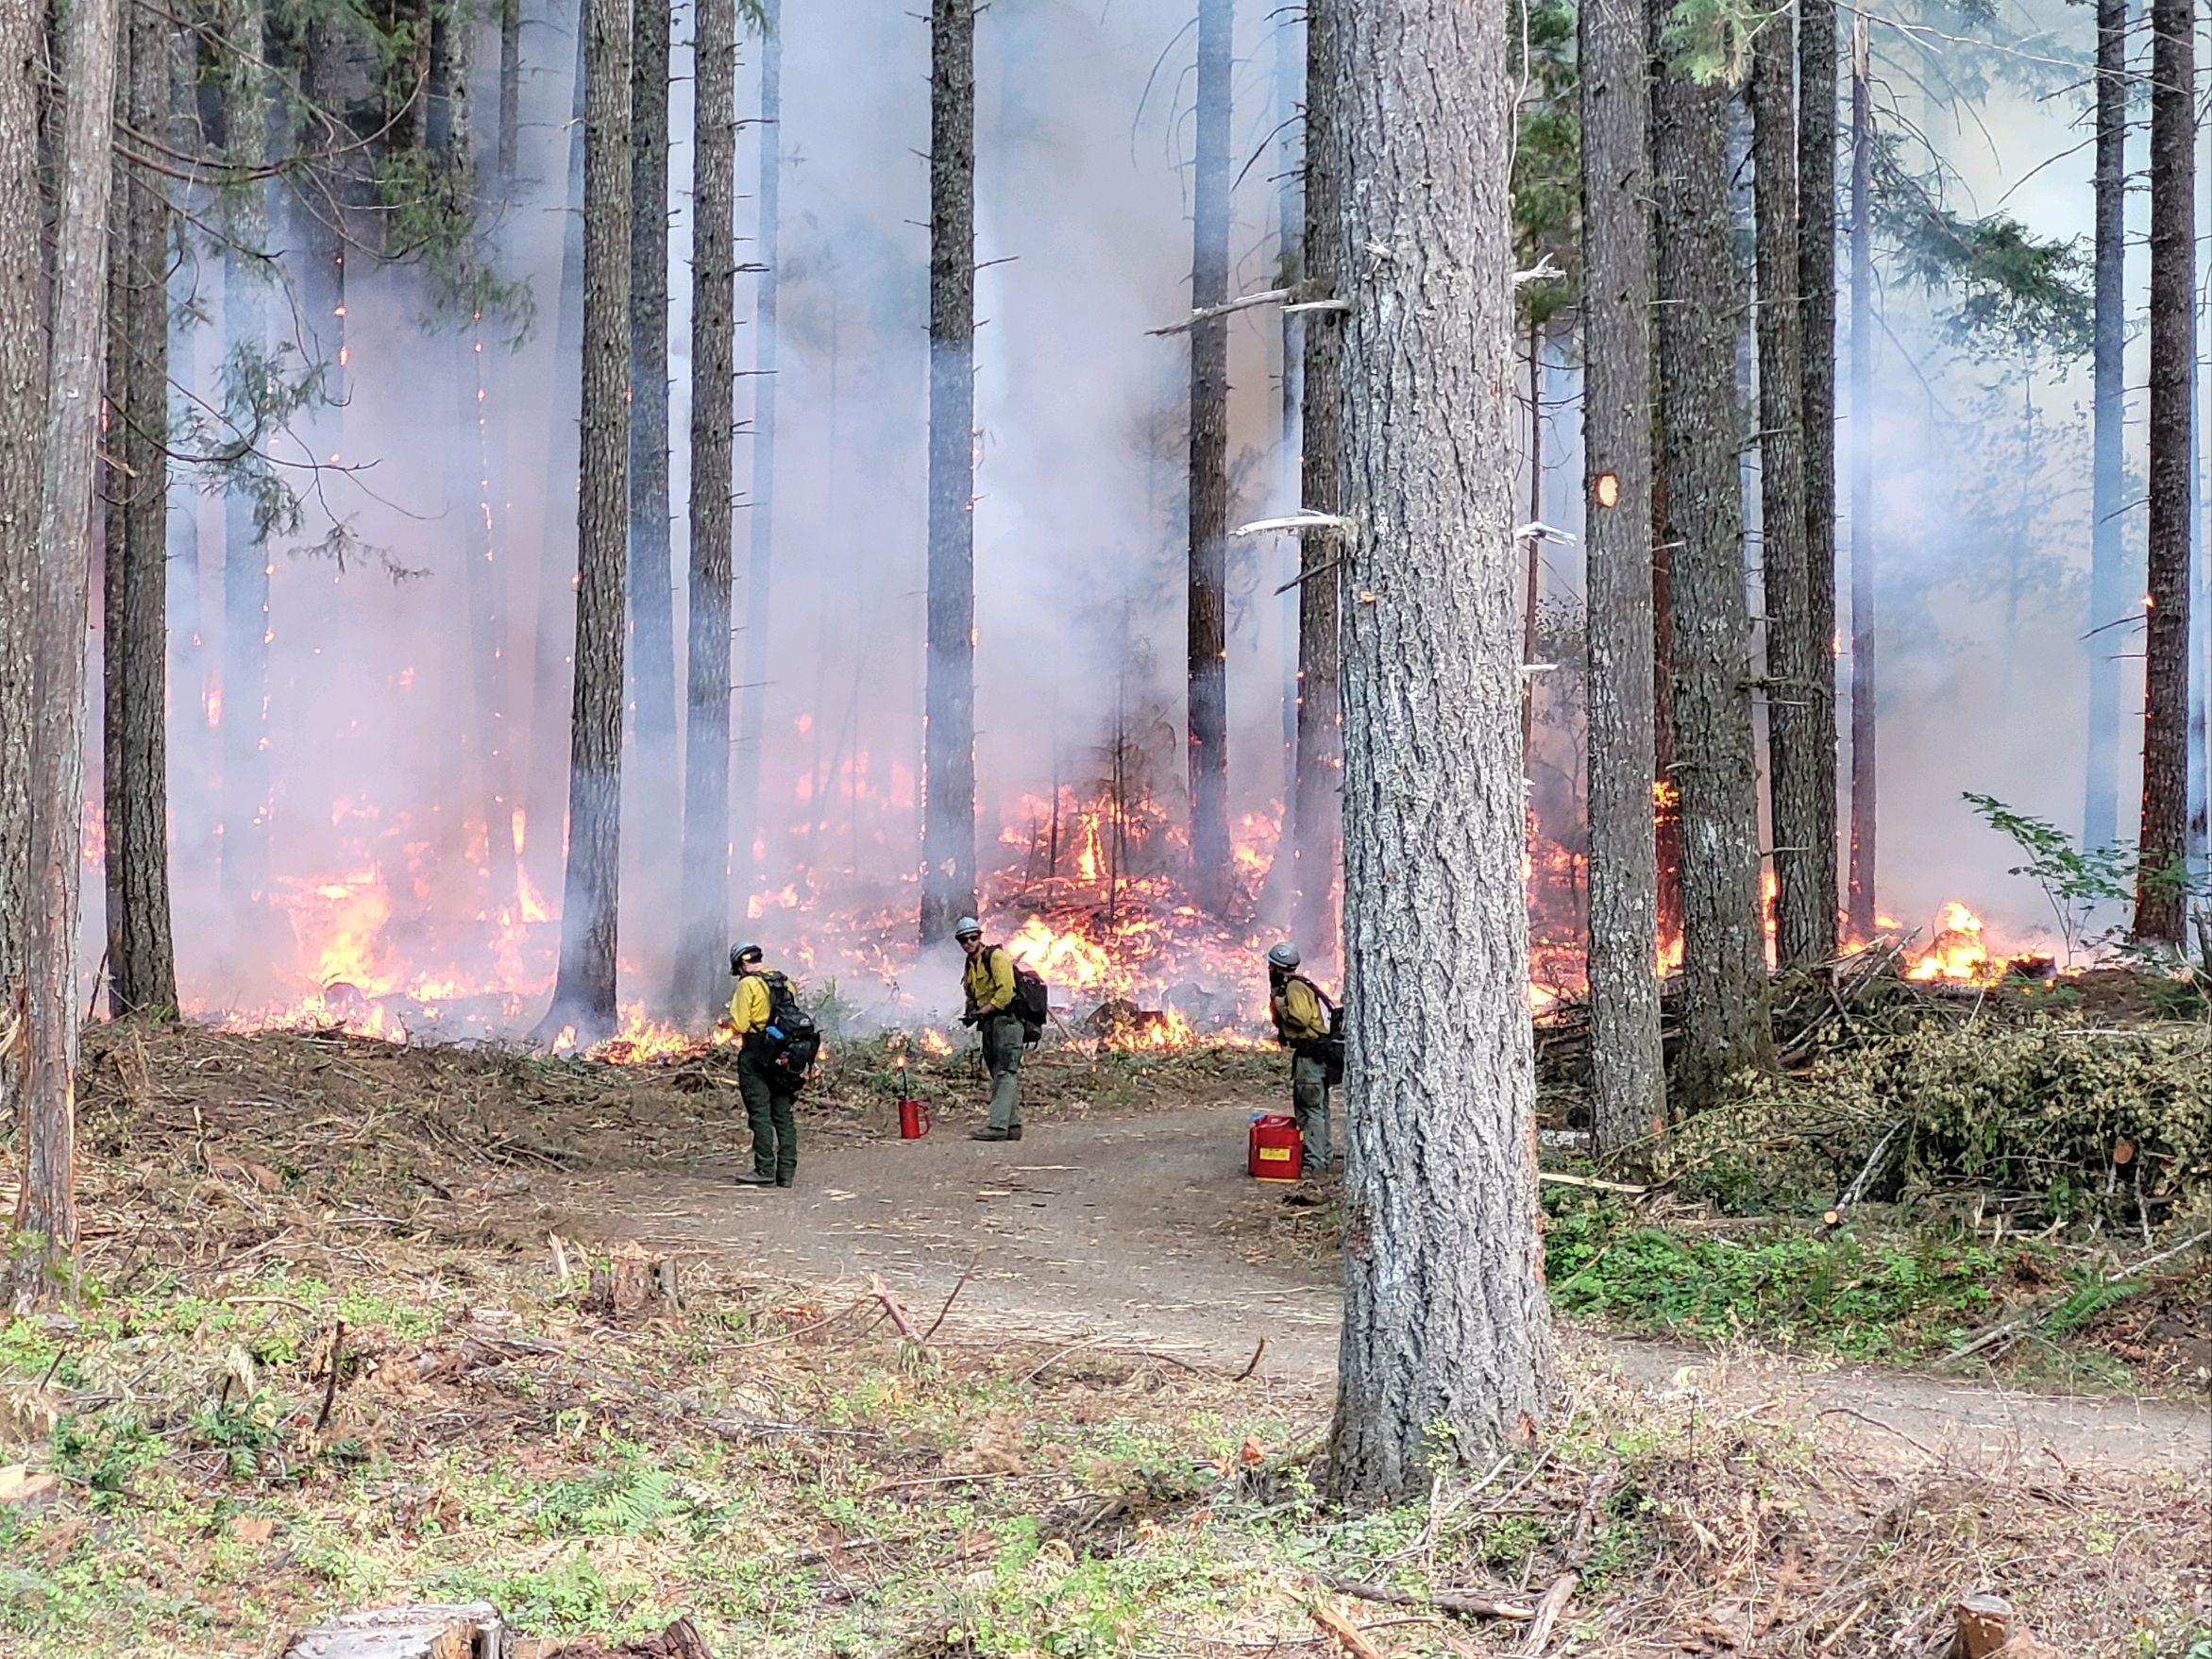 Firefighters firing from road 9/16